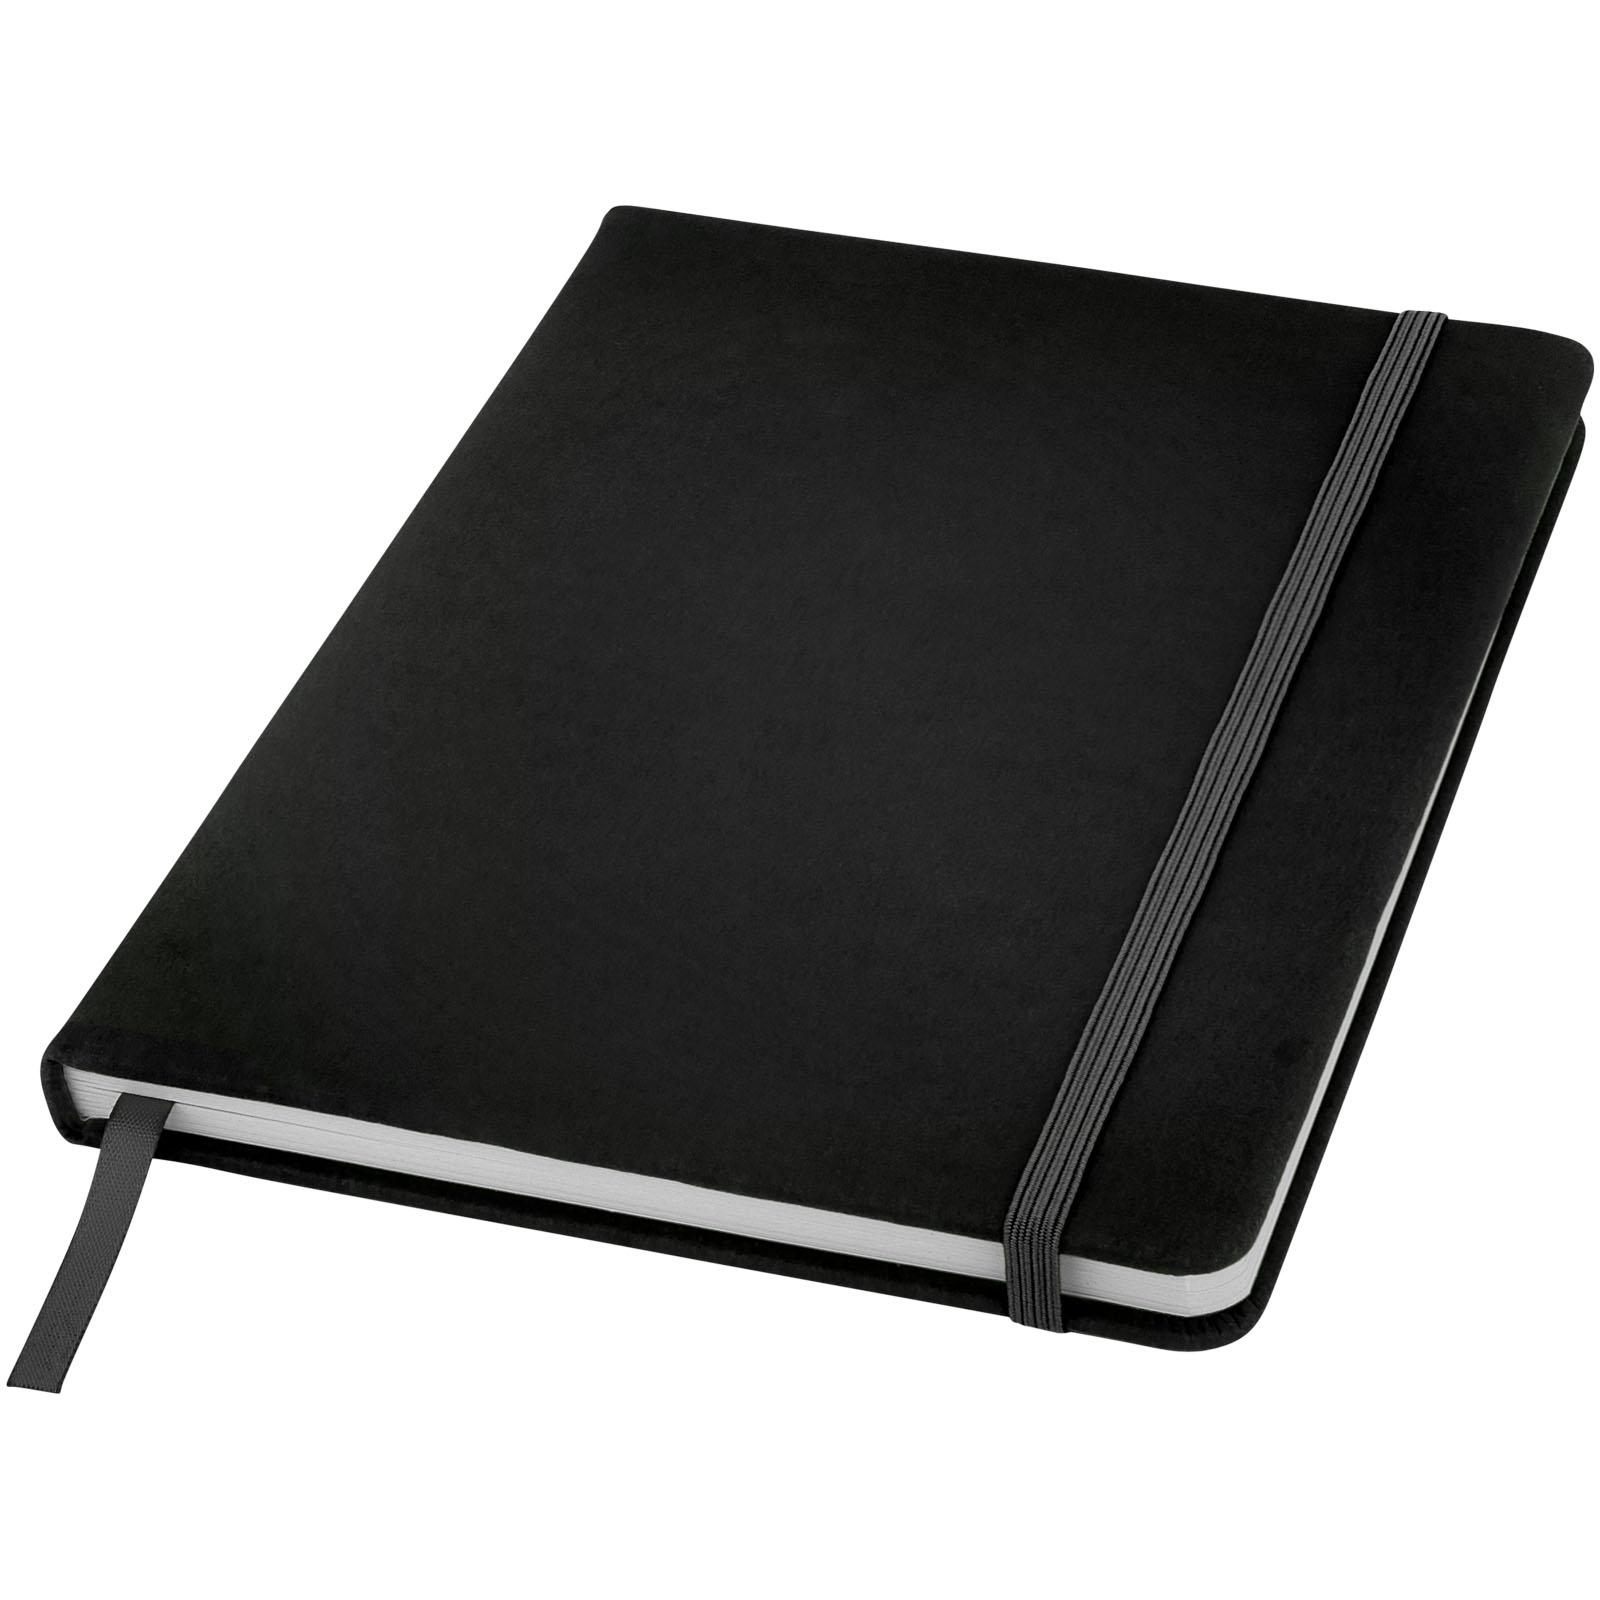 Advertising Hard cover notebooks - Spectrum A5 hard cover notebook